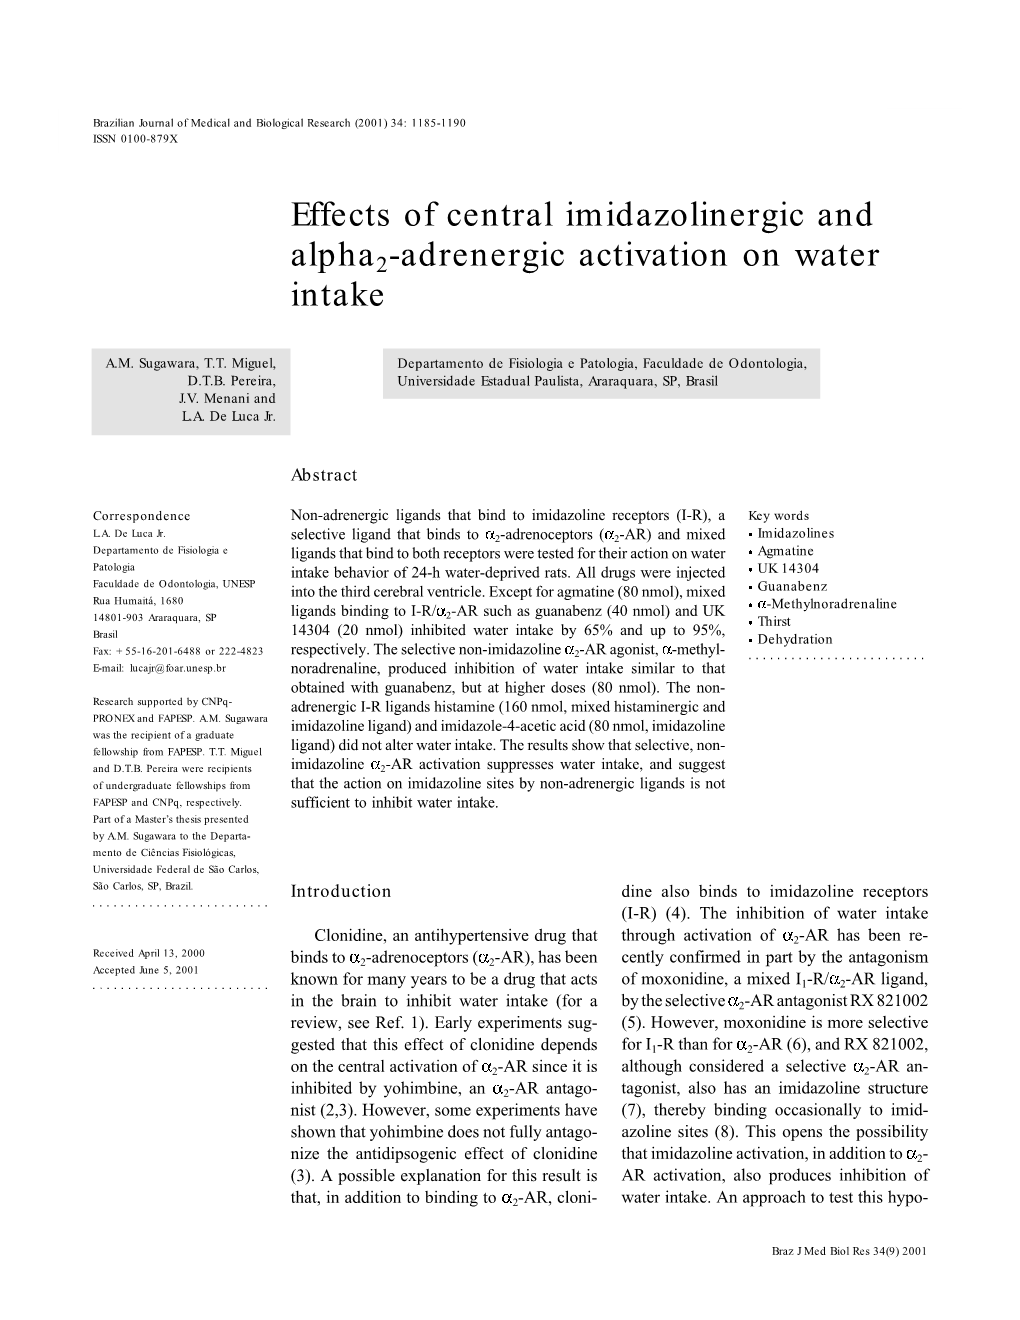 Effects of Central Imidazolinergic and Alpha2-Adrenergic Activation on Water Intake